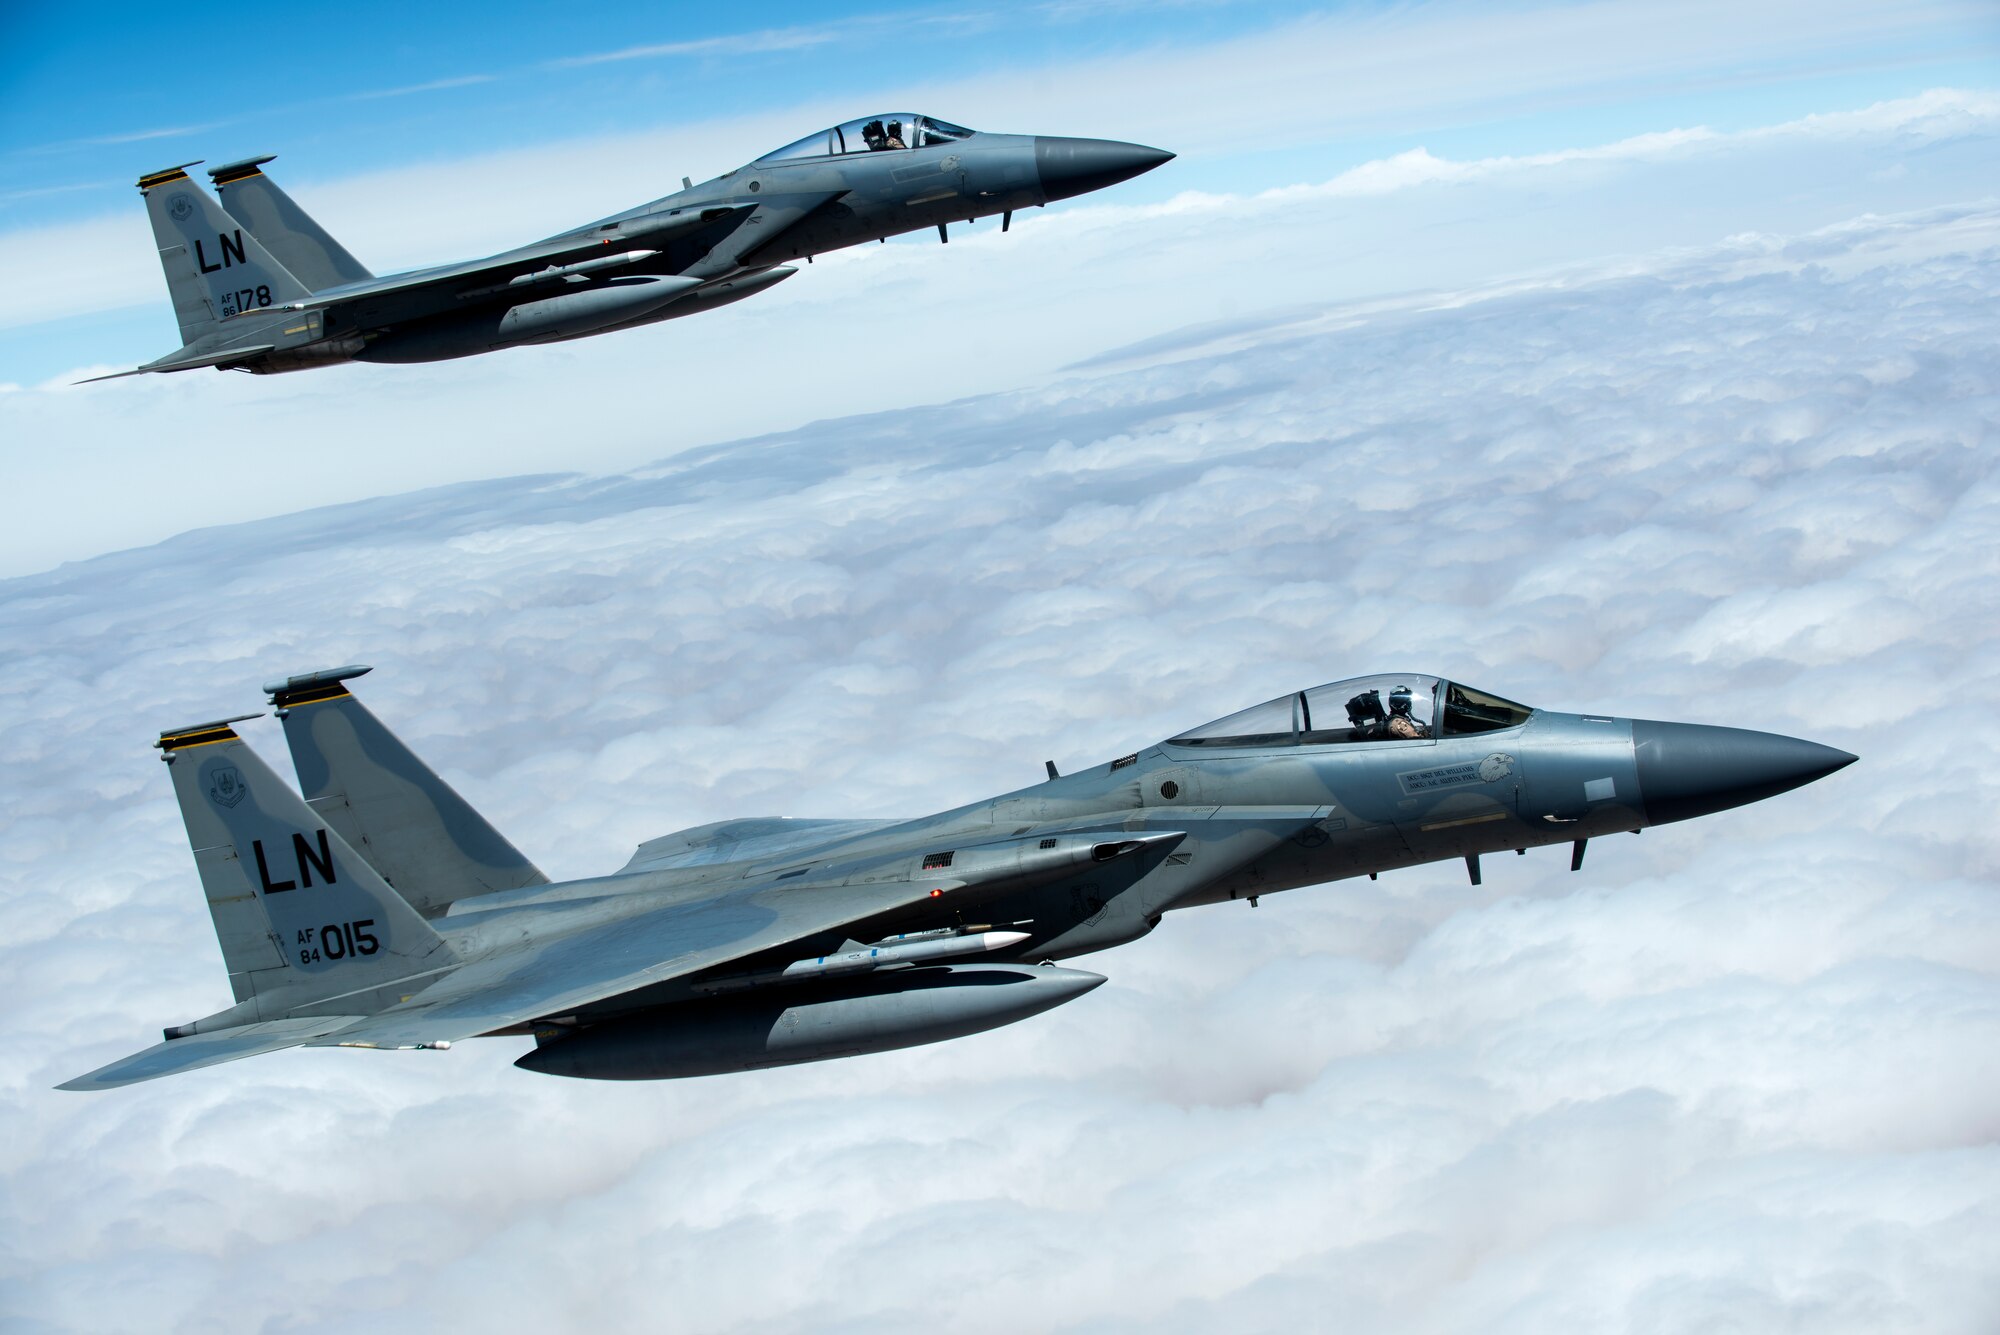 A formation of F-15C Eagles assigned to the 493rd Fighter Squadron flies over Morocco during Exercise African Lion April 20, 2018. Various units from the U.S. Armed Forces will conduct multilateral and stability operations training with units from the Royal Moroccan Armed Forces in the Kingdom of Morocco. This combined multilateral exercise is designed to improve interoperability and mutual understanding of each nation’s tactics, techniques and procedures while demonstrating the strong bond between the nation’s militaries. (U.S. Air Force photo/Senior Airman Malcolm Mayfield)